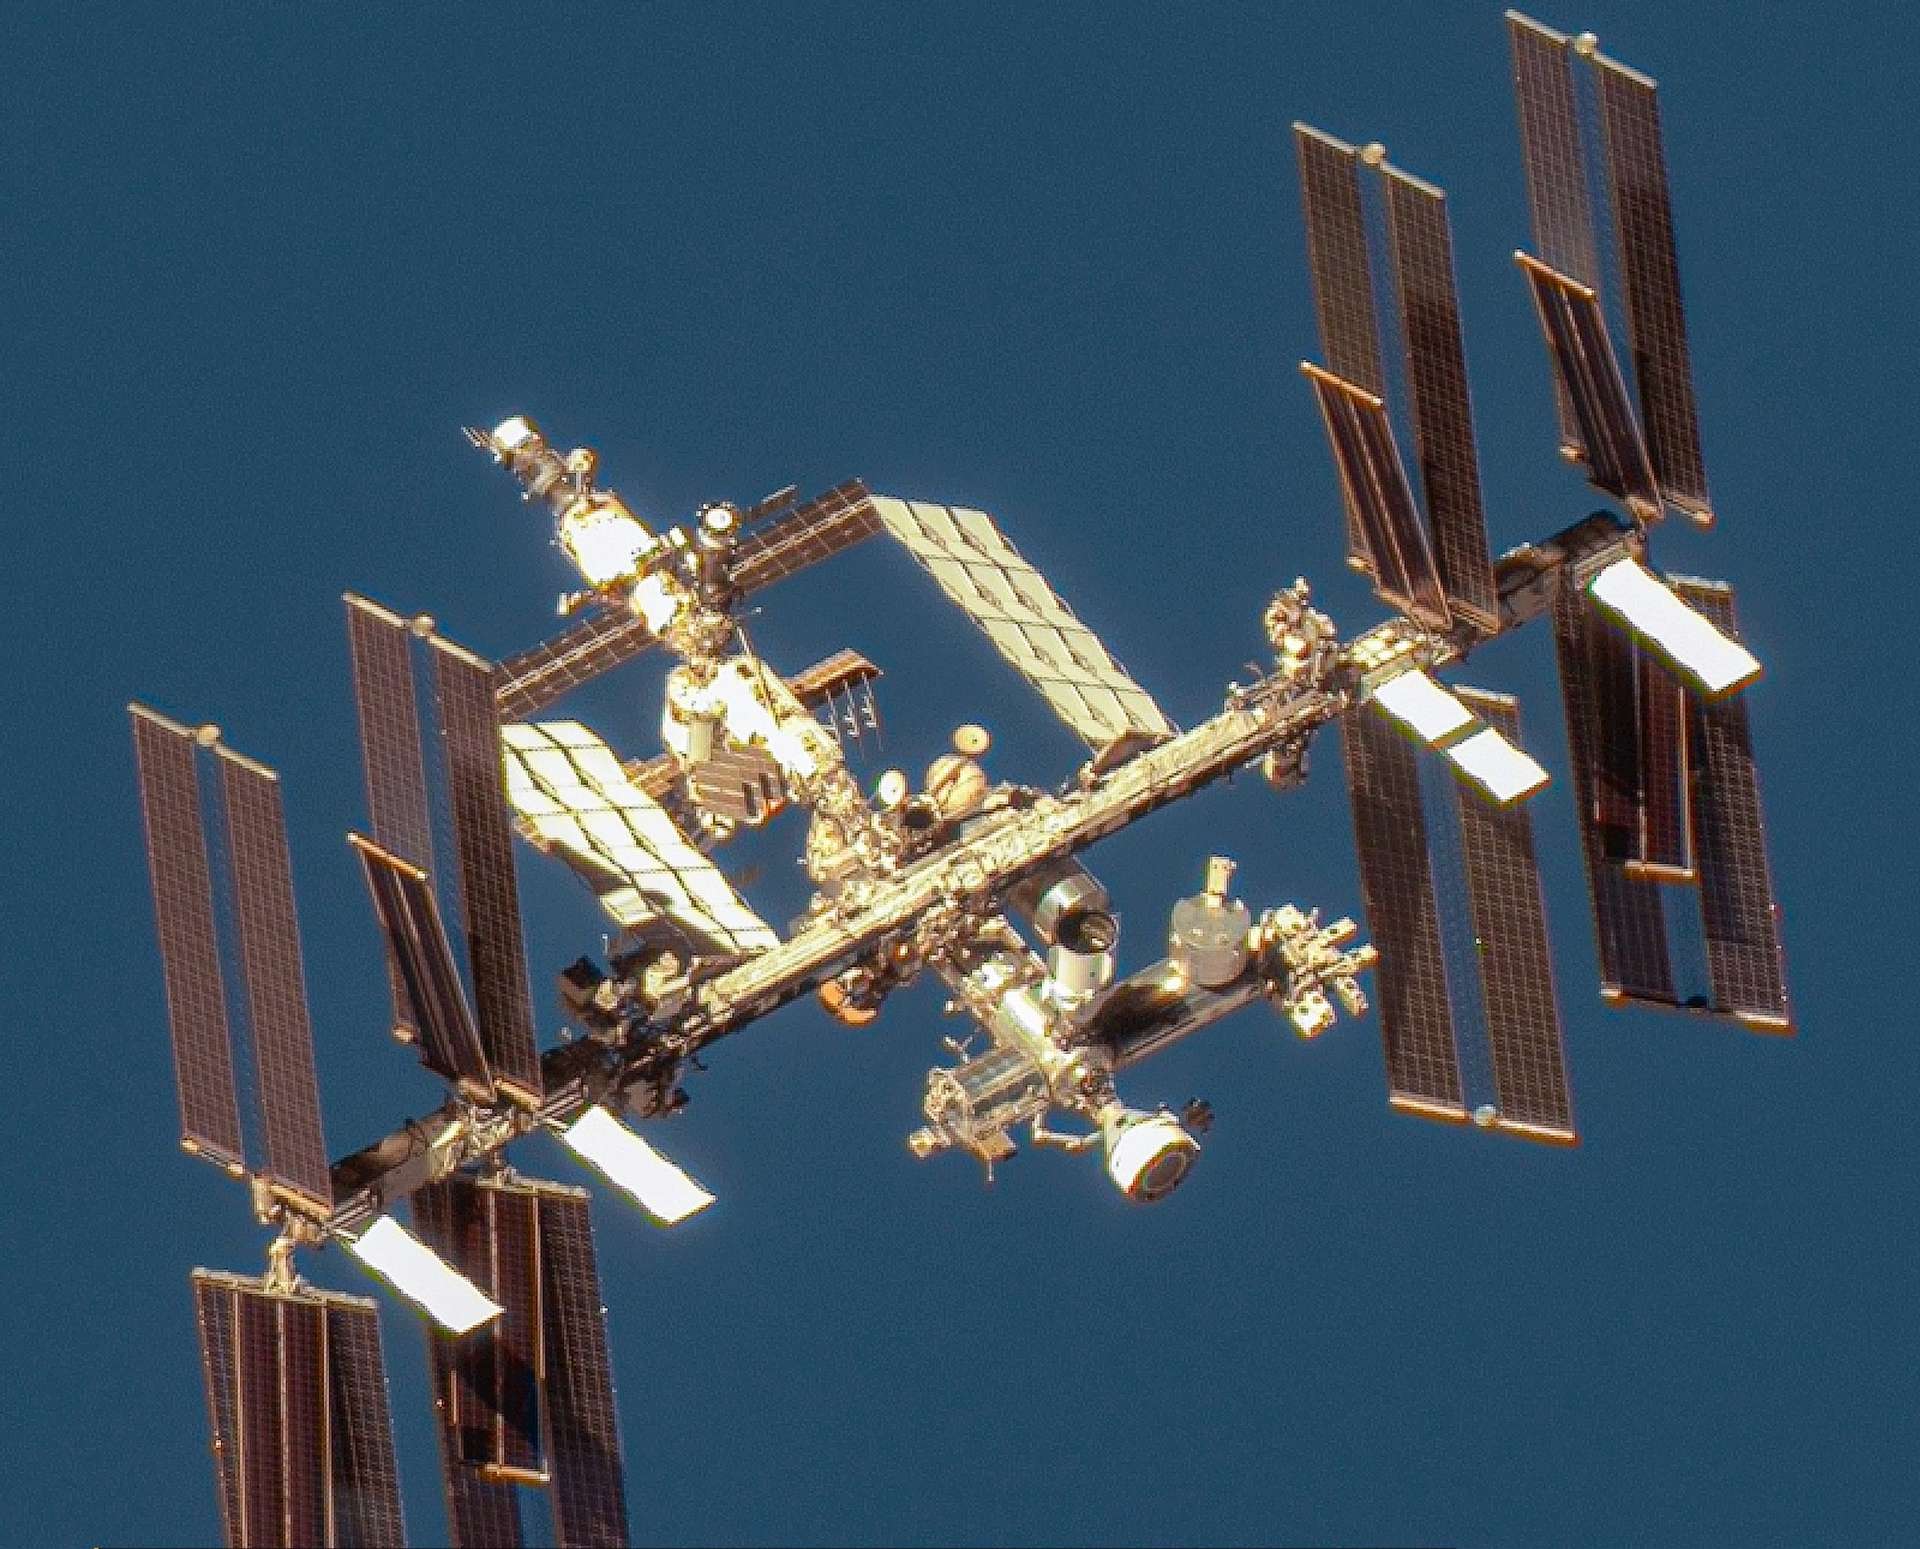 A breathtaking image of the space station in orbit taken by a satellite